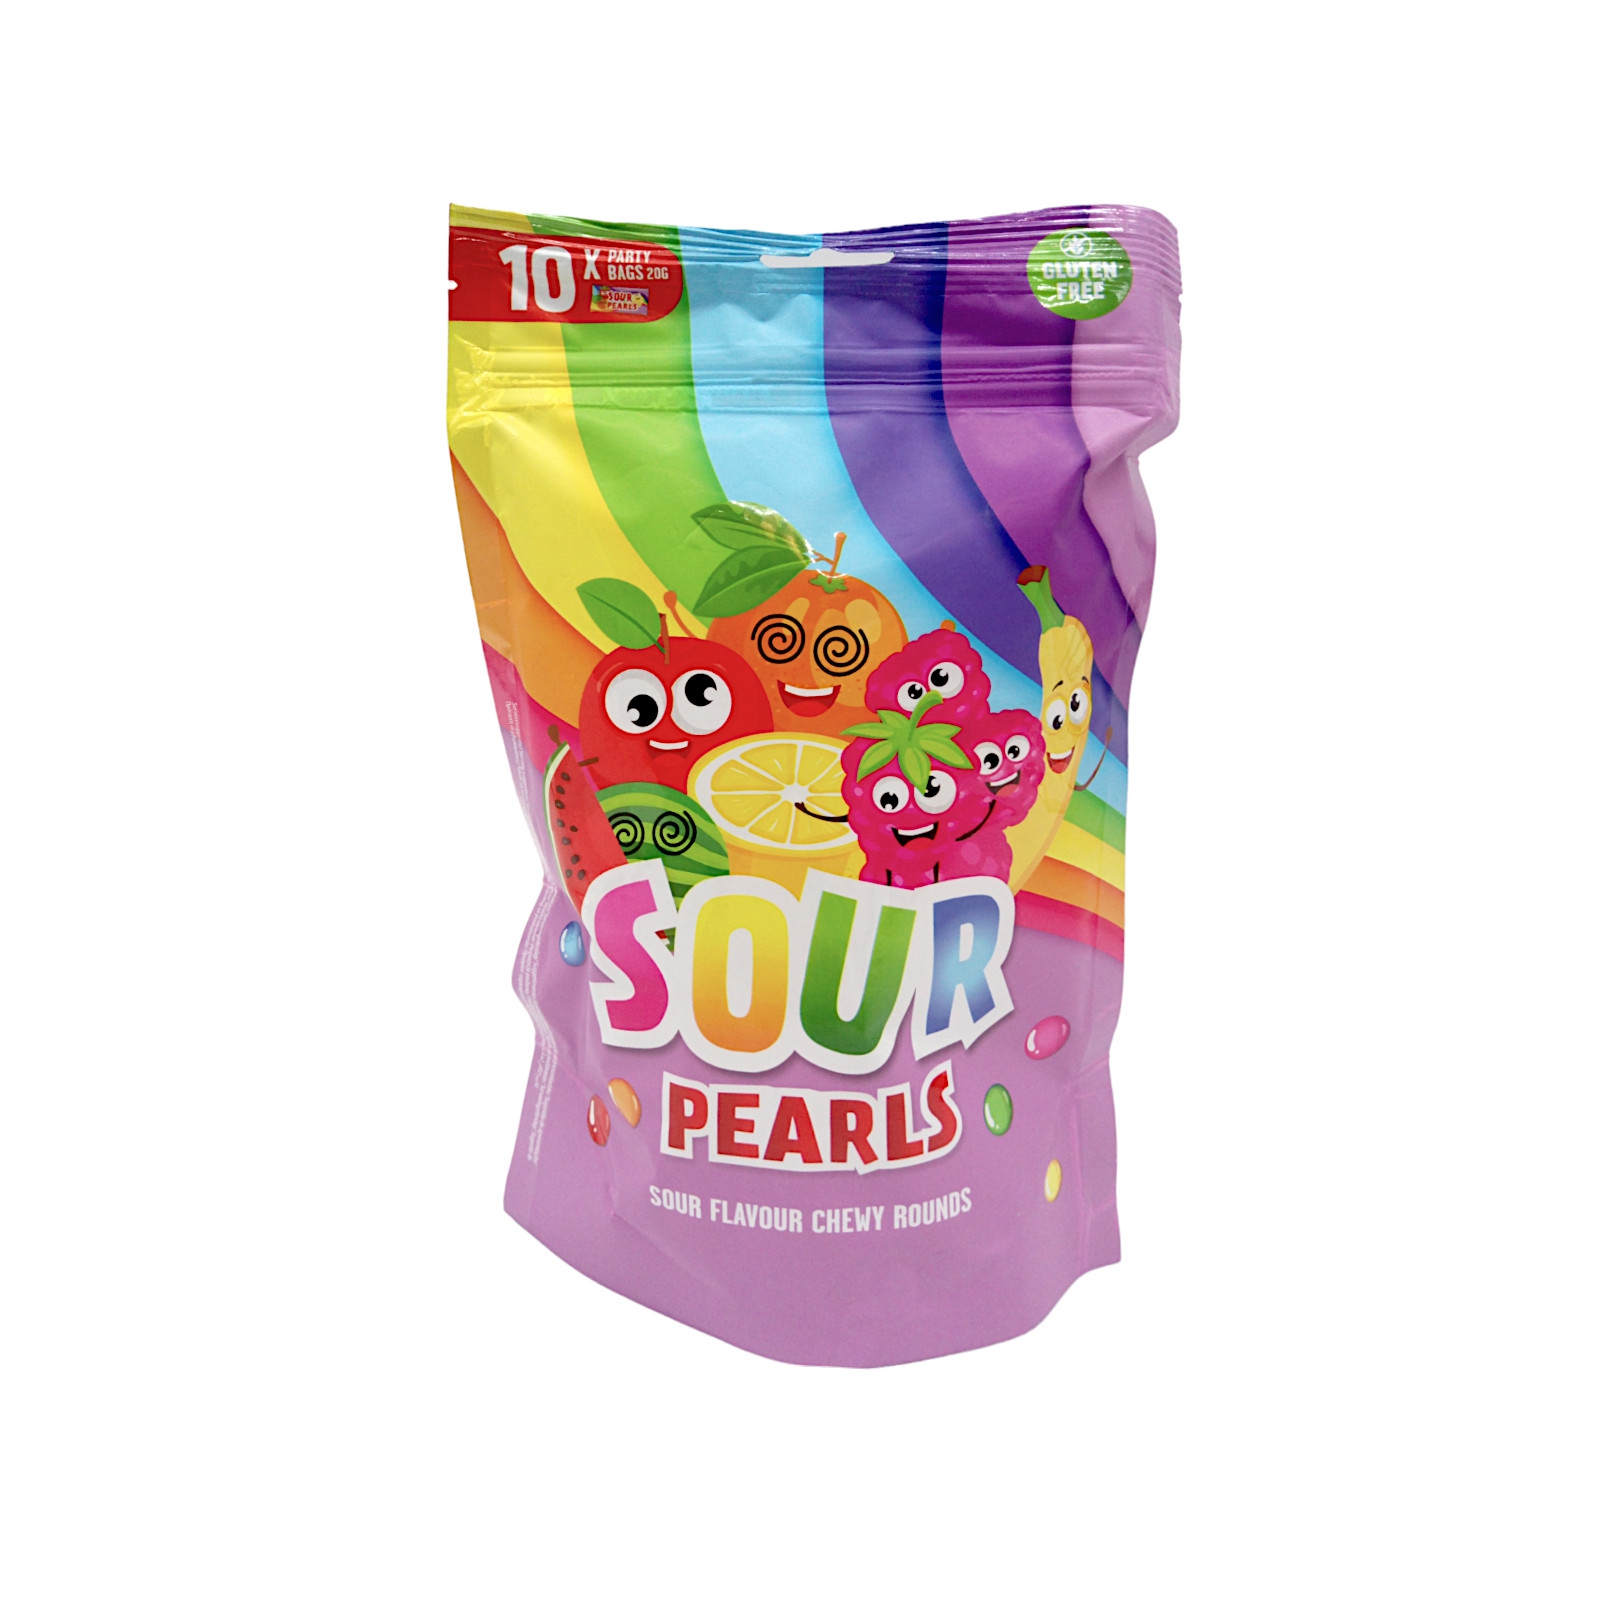 Sour Pearls 200g